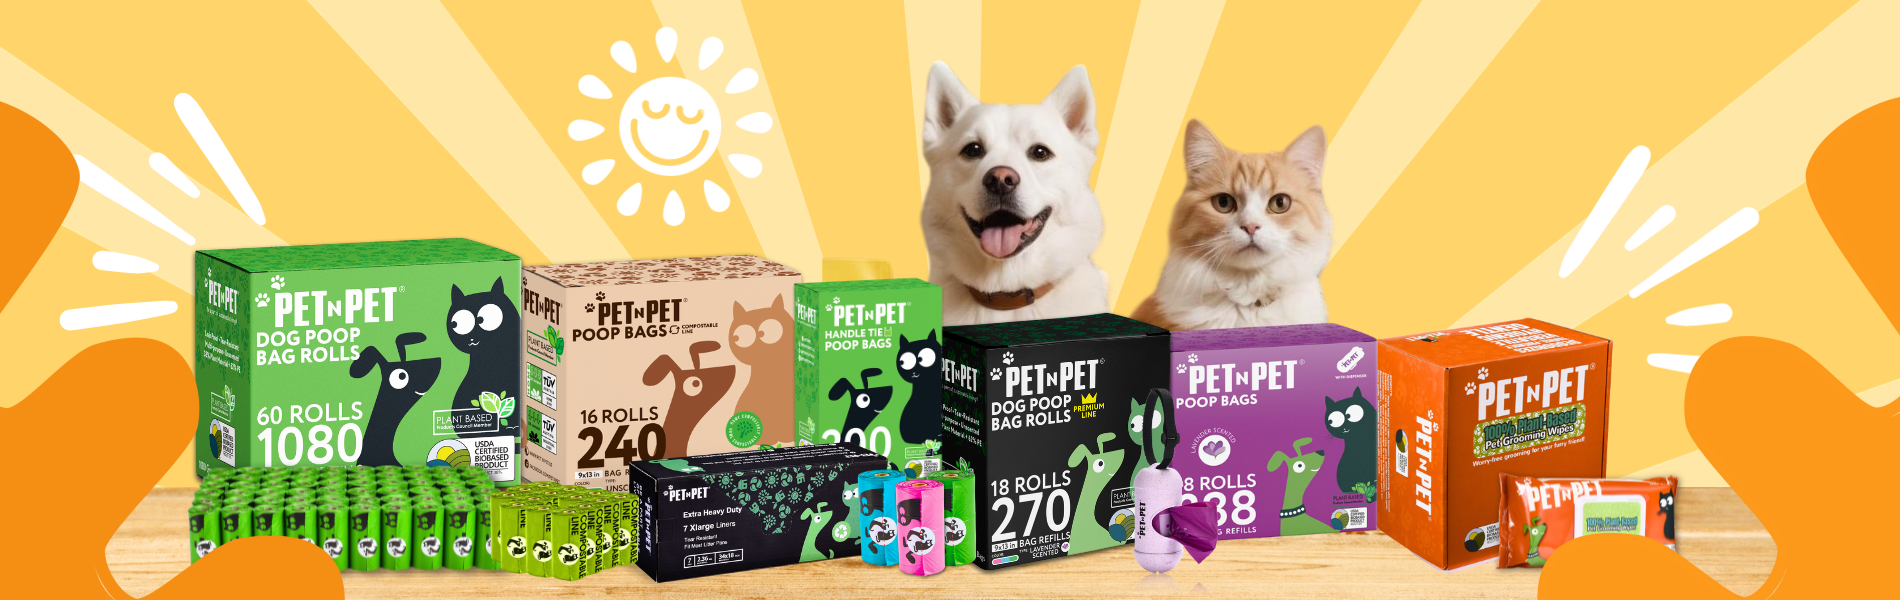 https://petnpet.us/collections/all